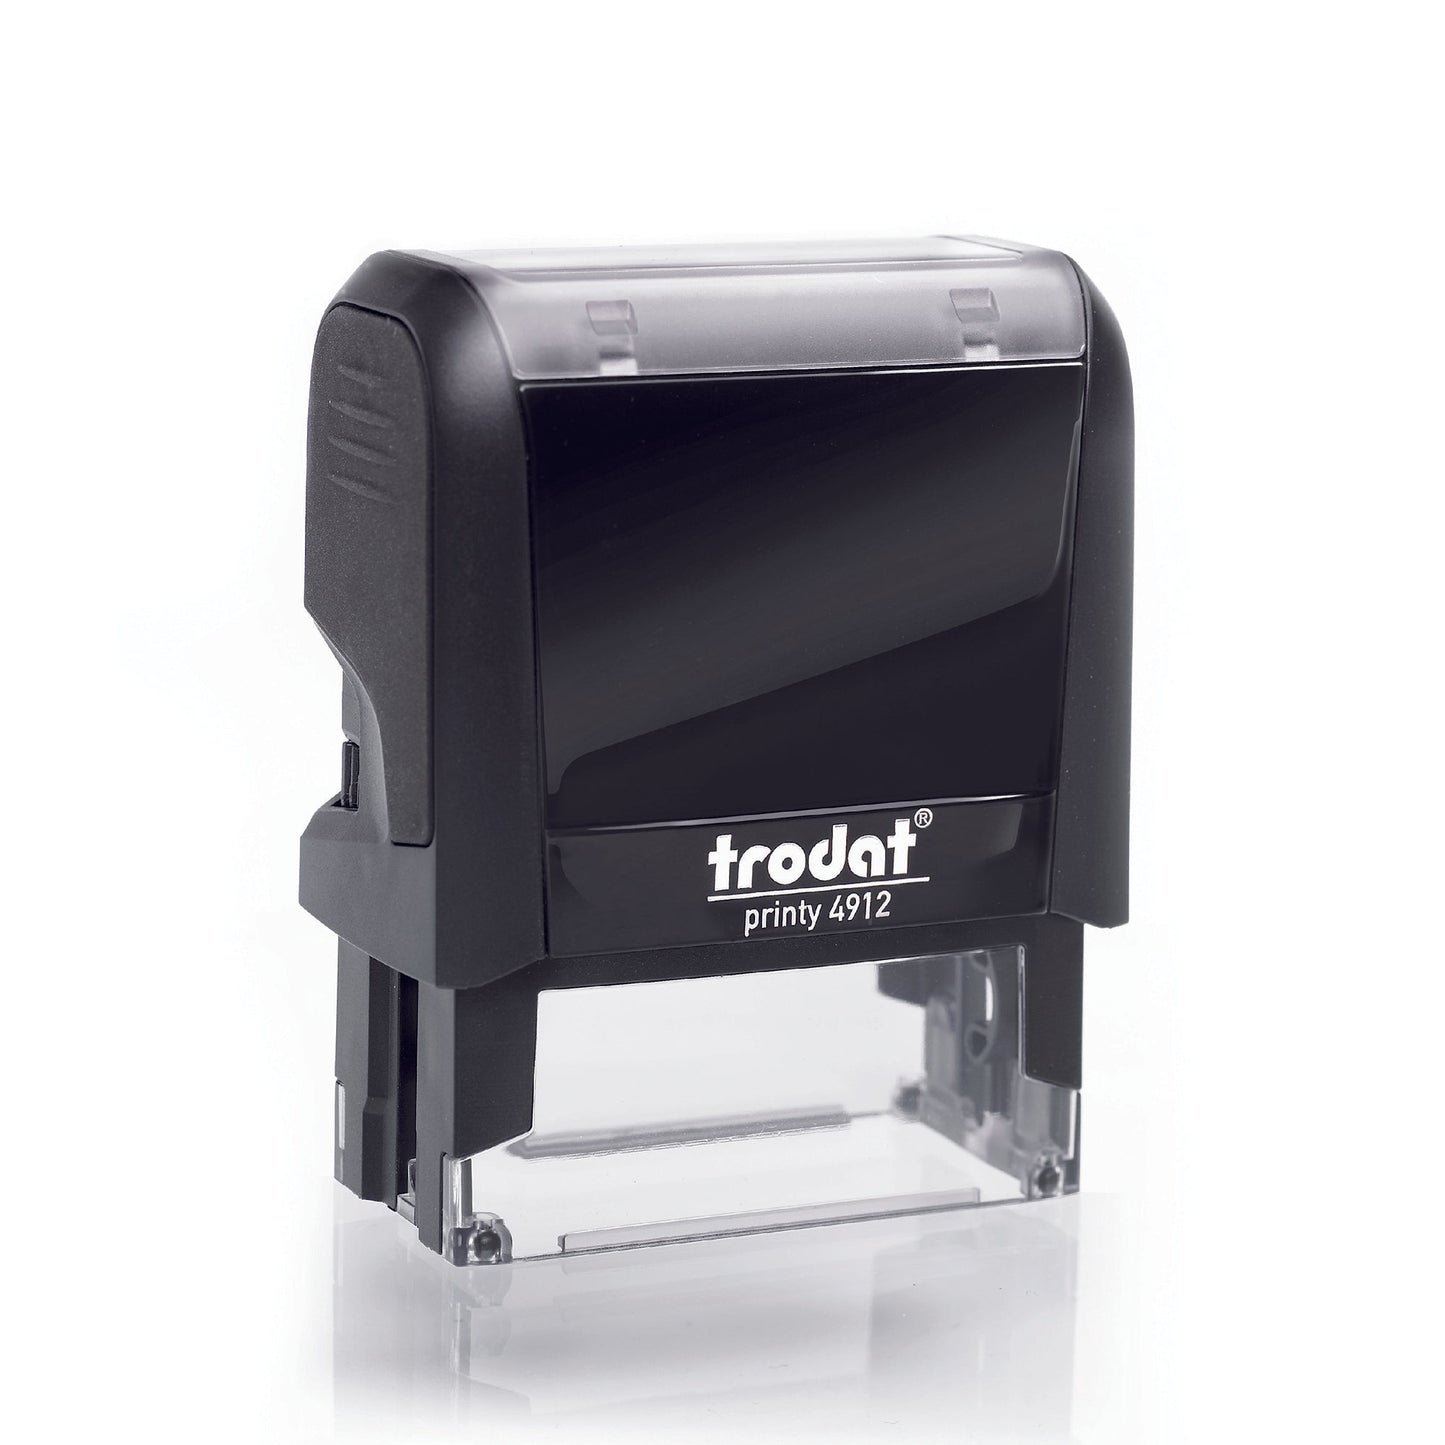 Approved - Self Inking Rubber Stamp - Trodat 4912